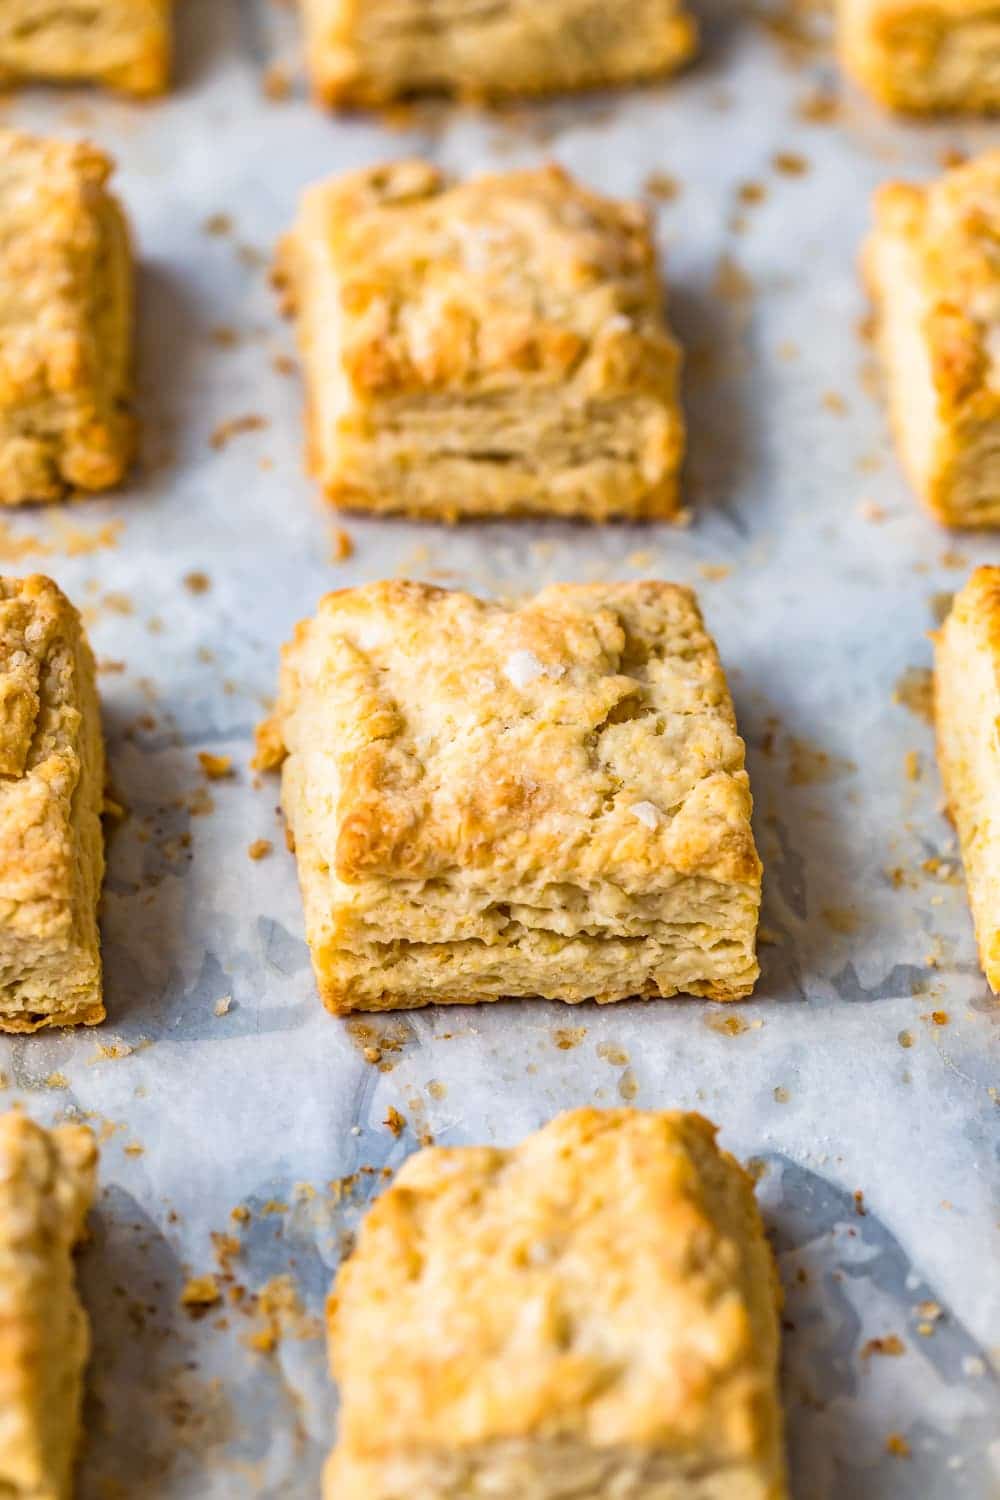 Easy buttermilk biscuits arranged in squares on a baking sheet.